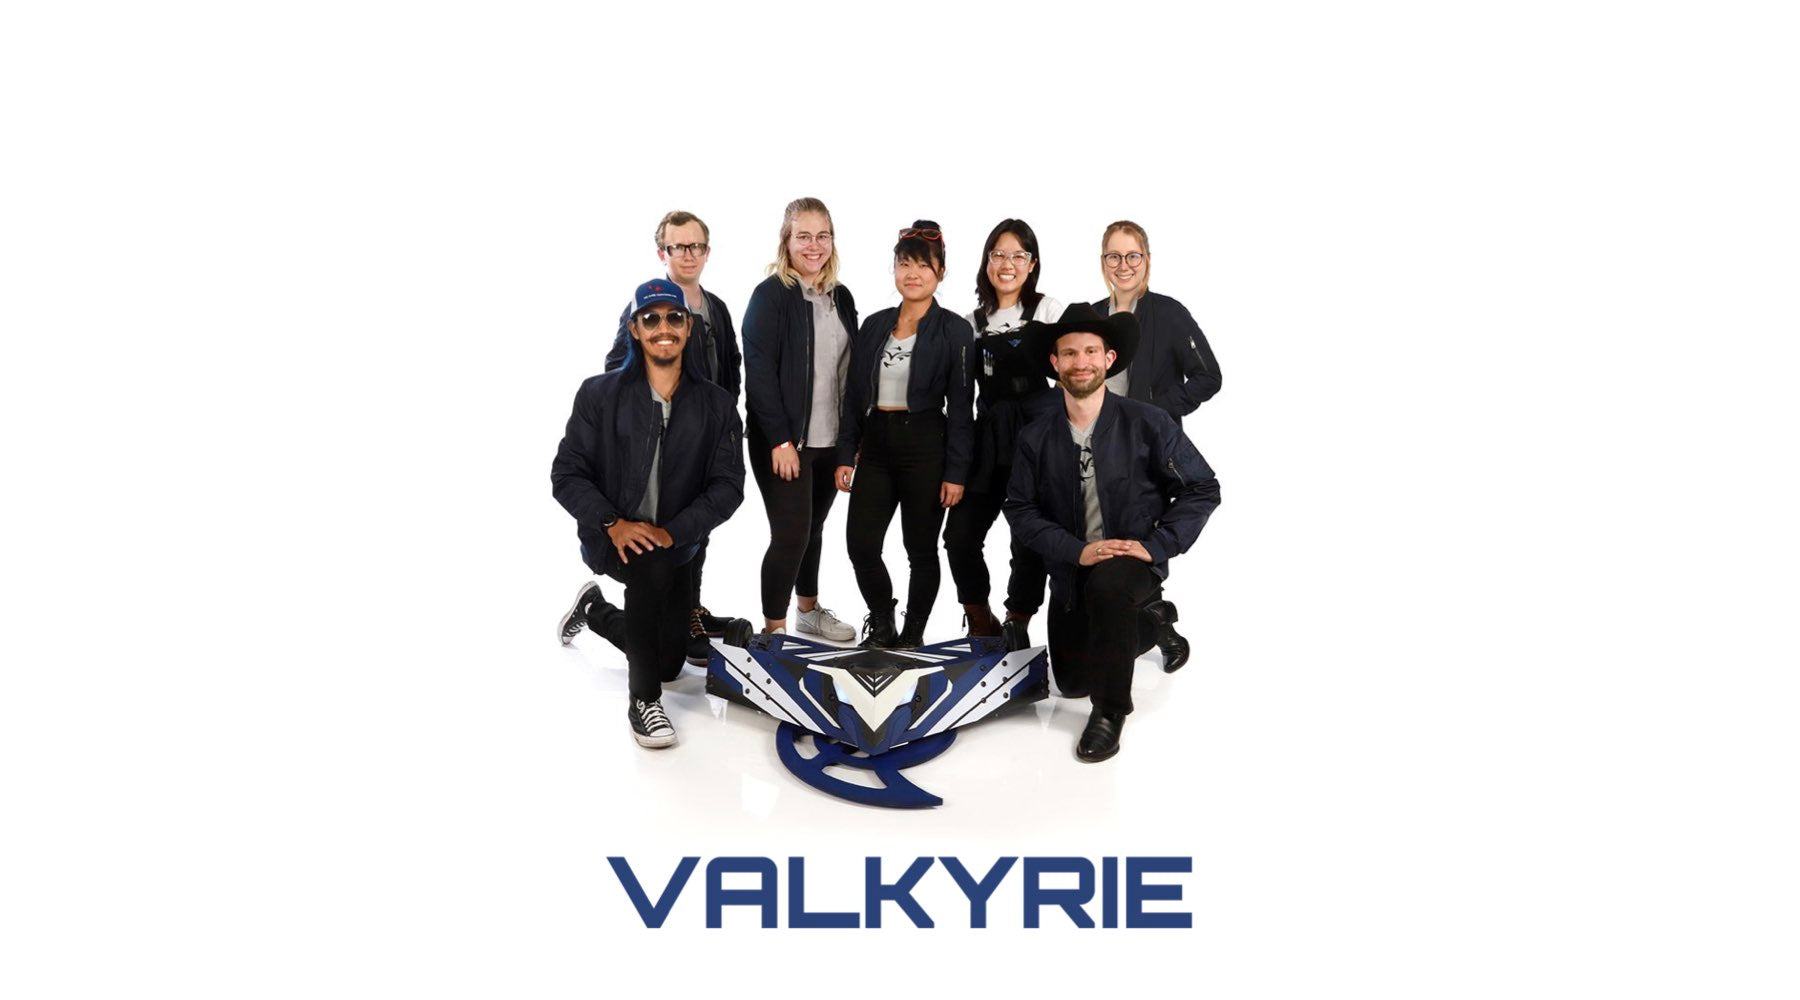 BattleBots team Valkyrie captain Lucy Du exclusive interview with Xena Workwear